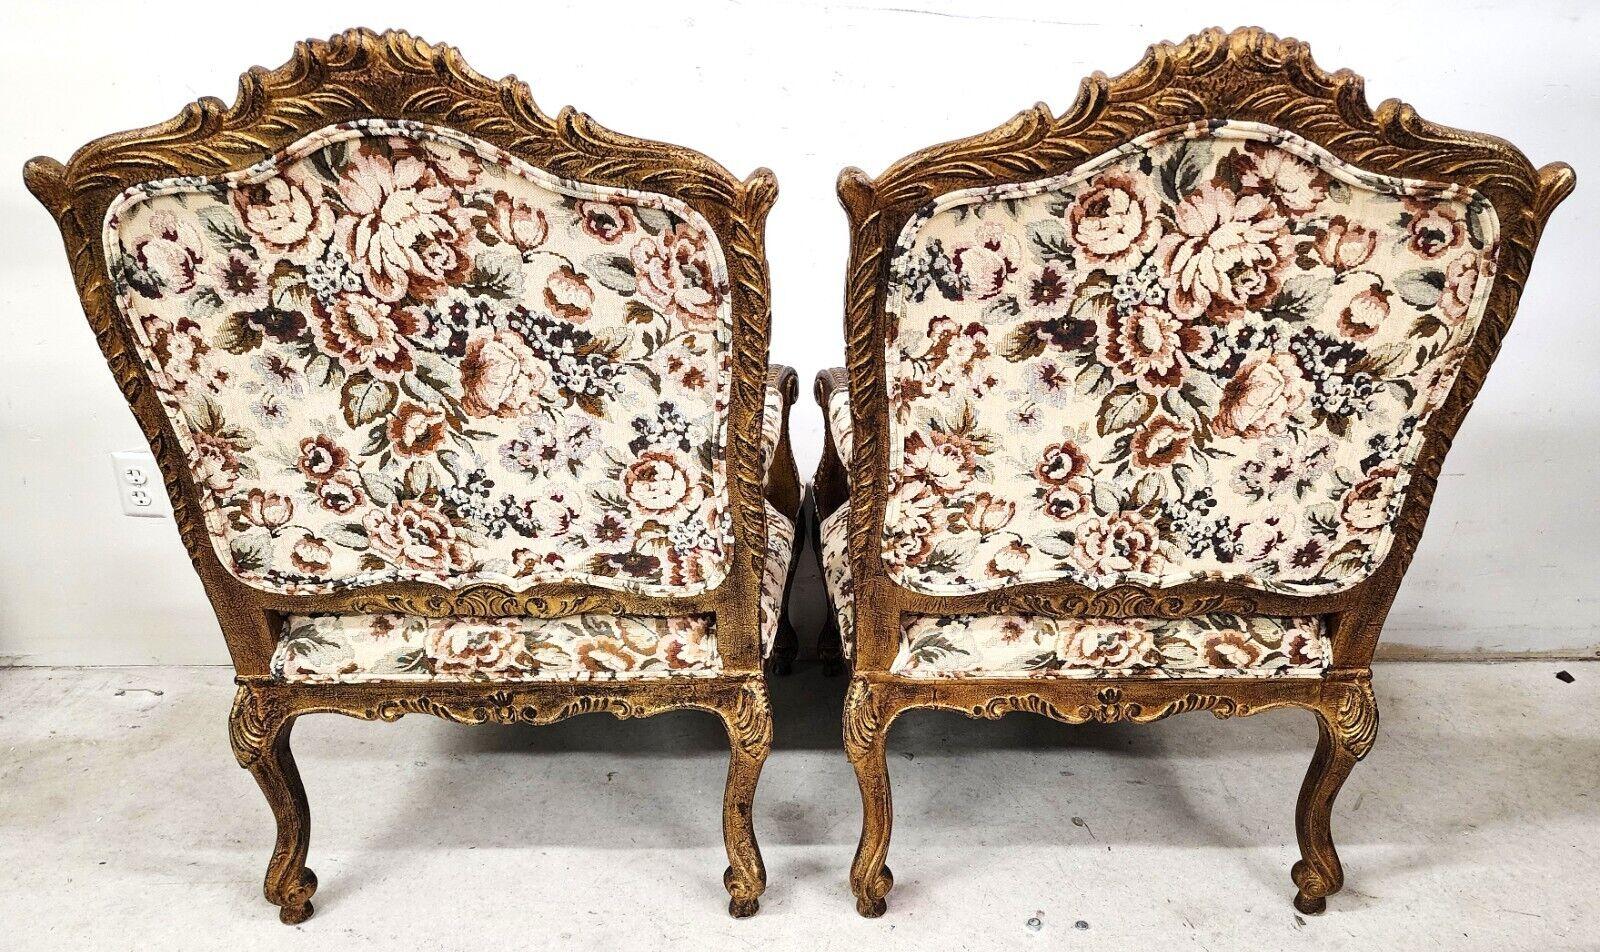 French Louis XV Rococo Giltwood Fauteuil Oversized Armchairs - a Pair For Sale 6